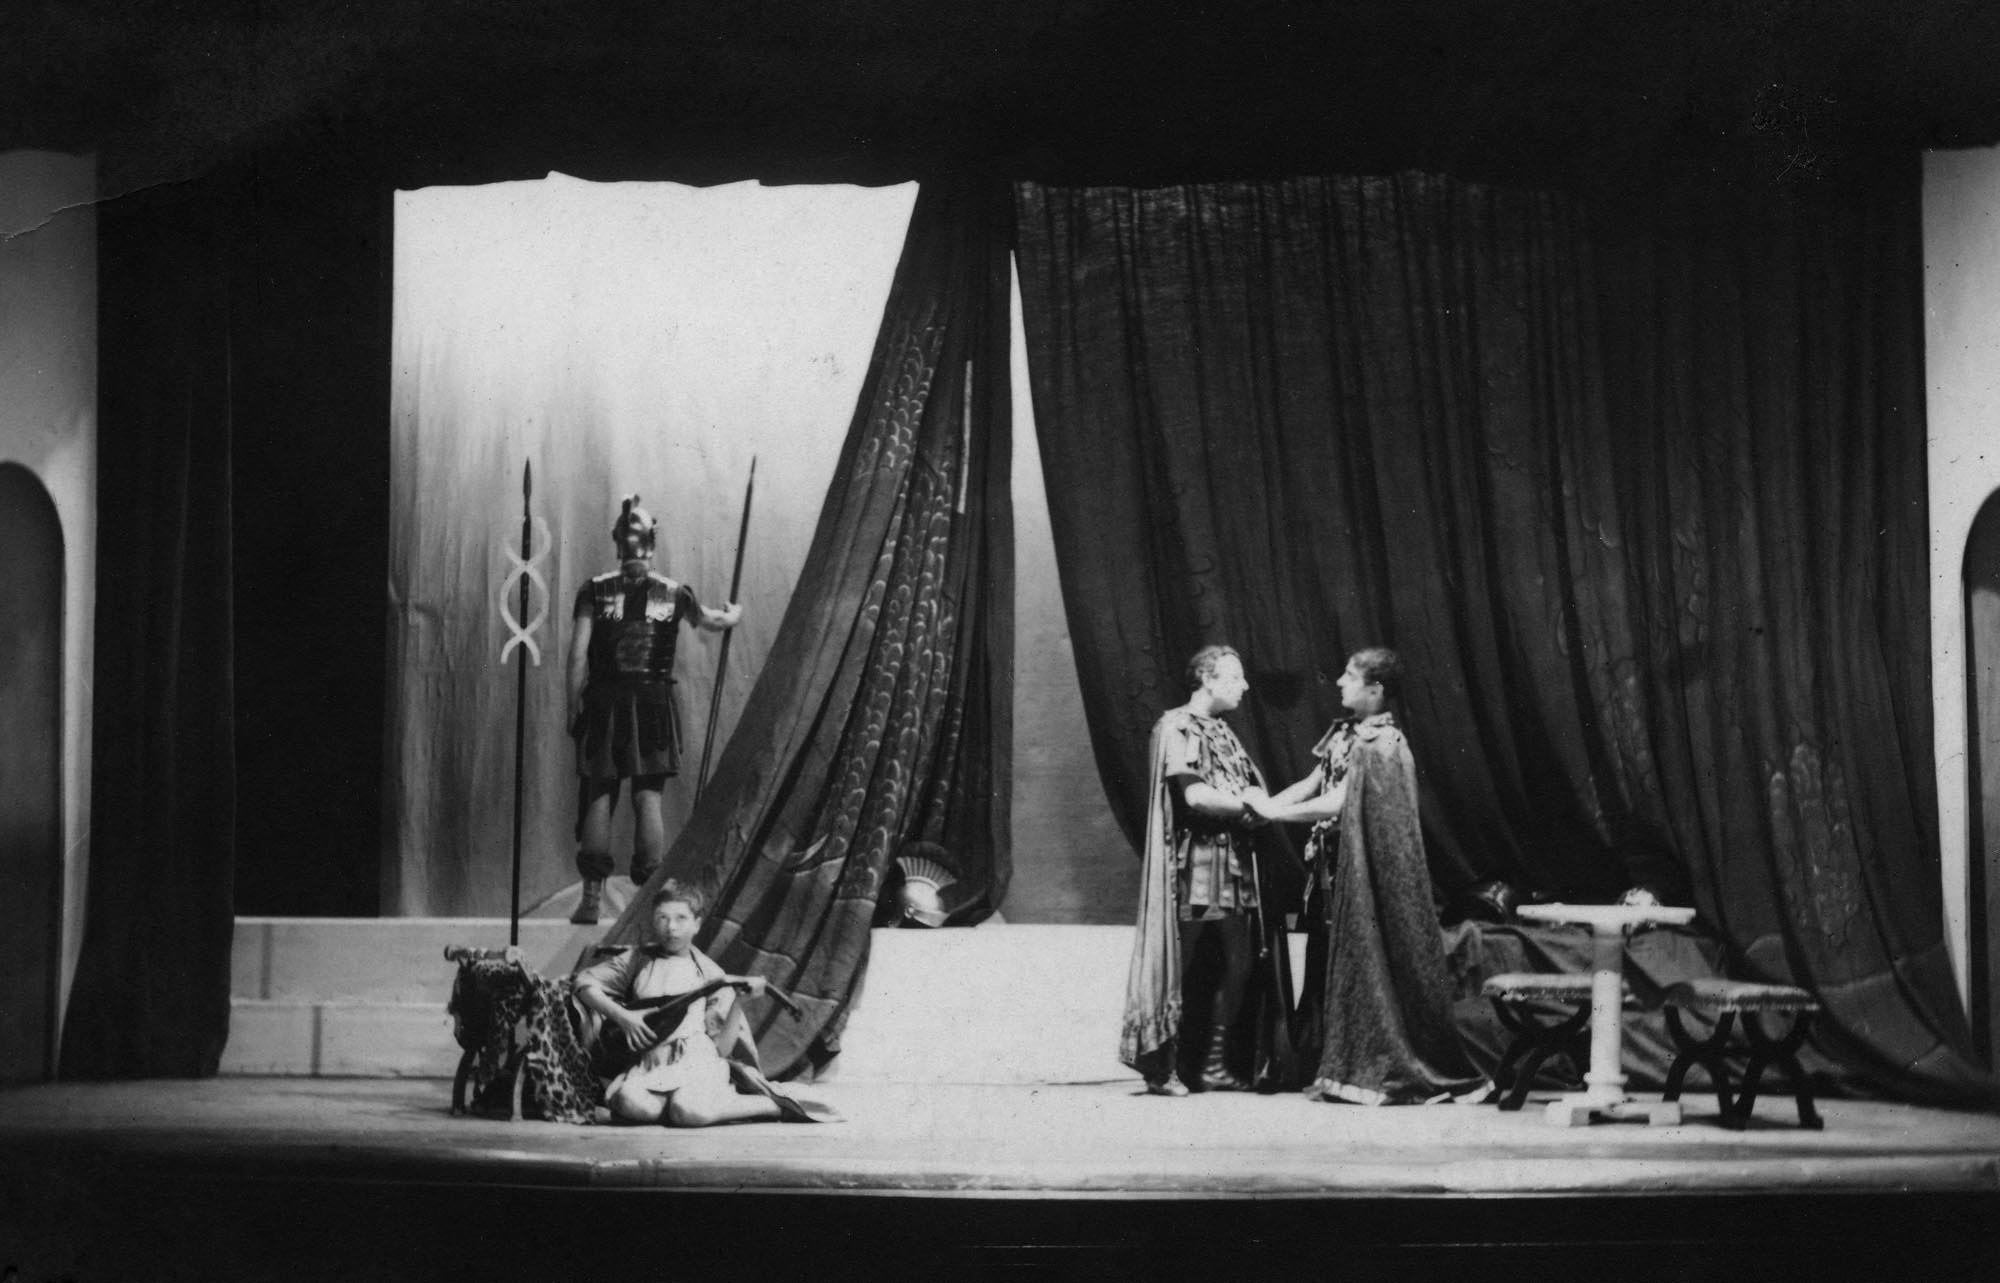 Richard Attenborough as Lucius (lute player) in 1937 - Little Theatre Archive